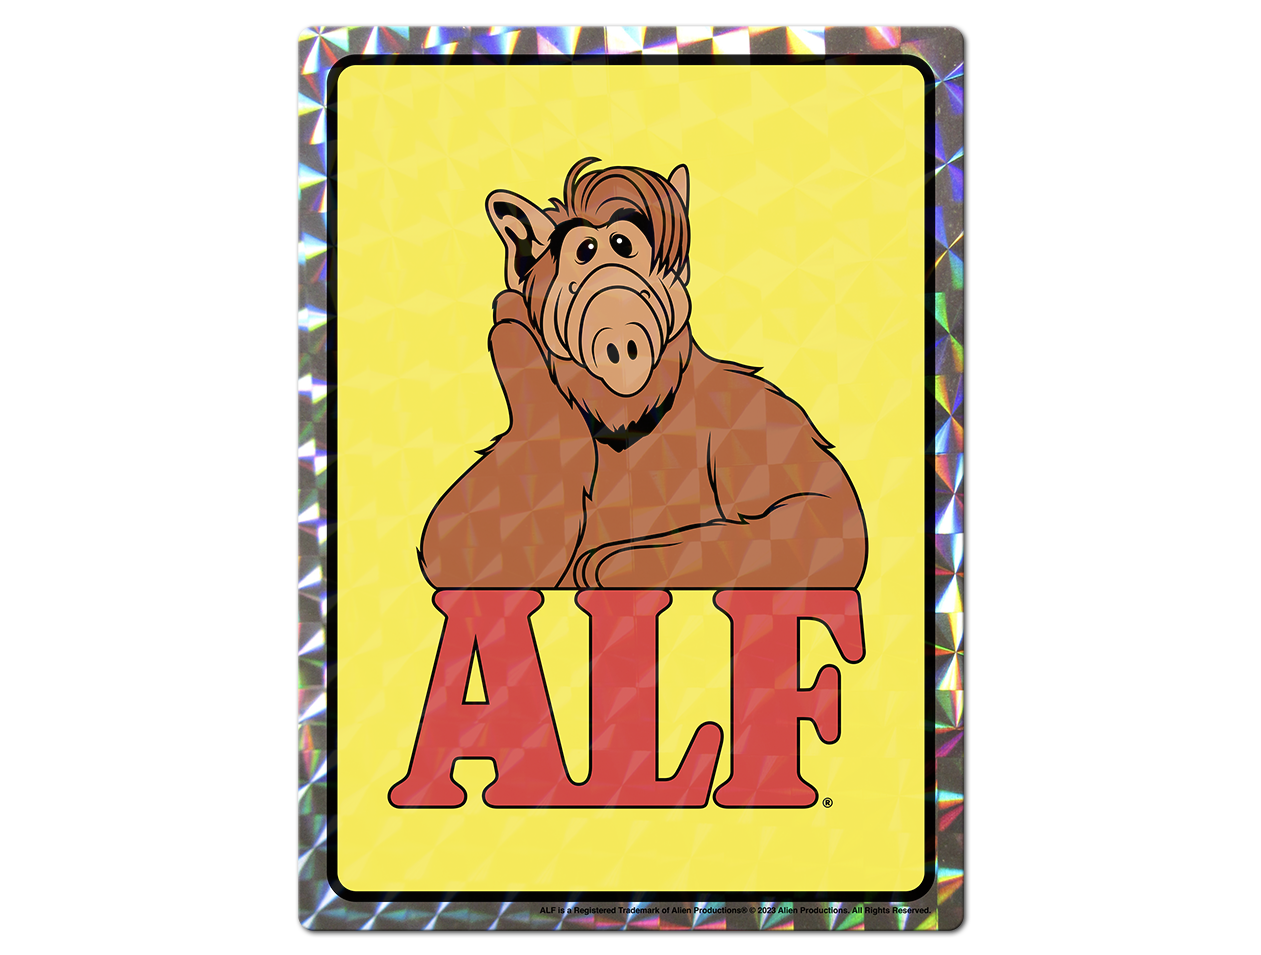 ALF: The Complete Series [Deluxe Edition] + Poster + Prism Sticker